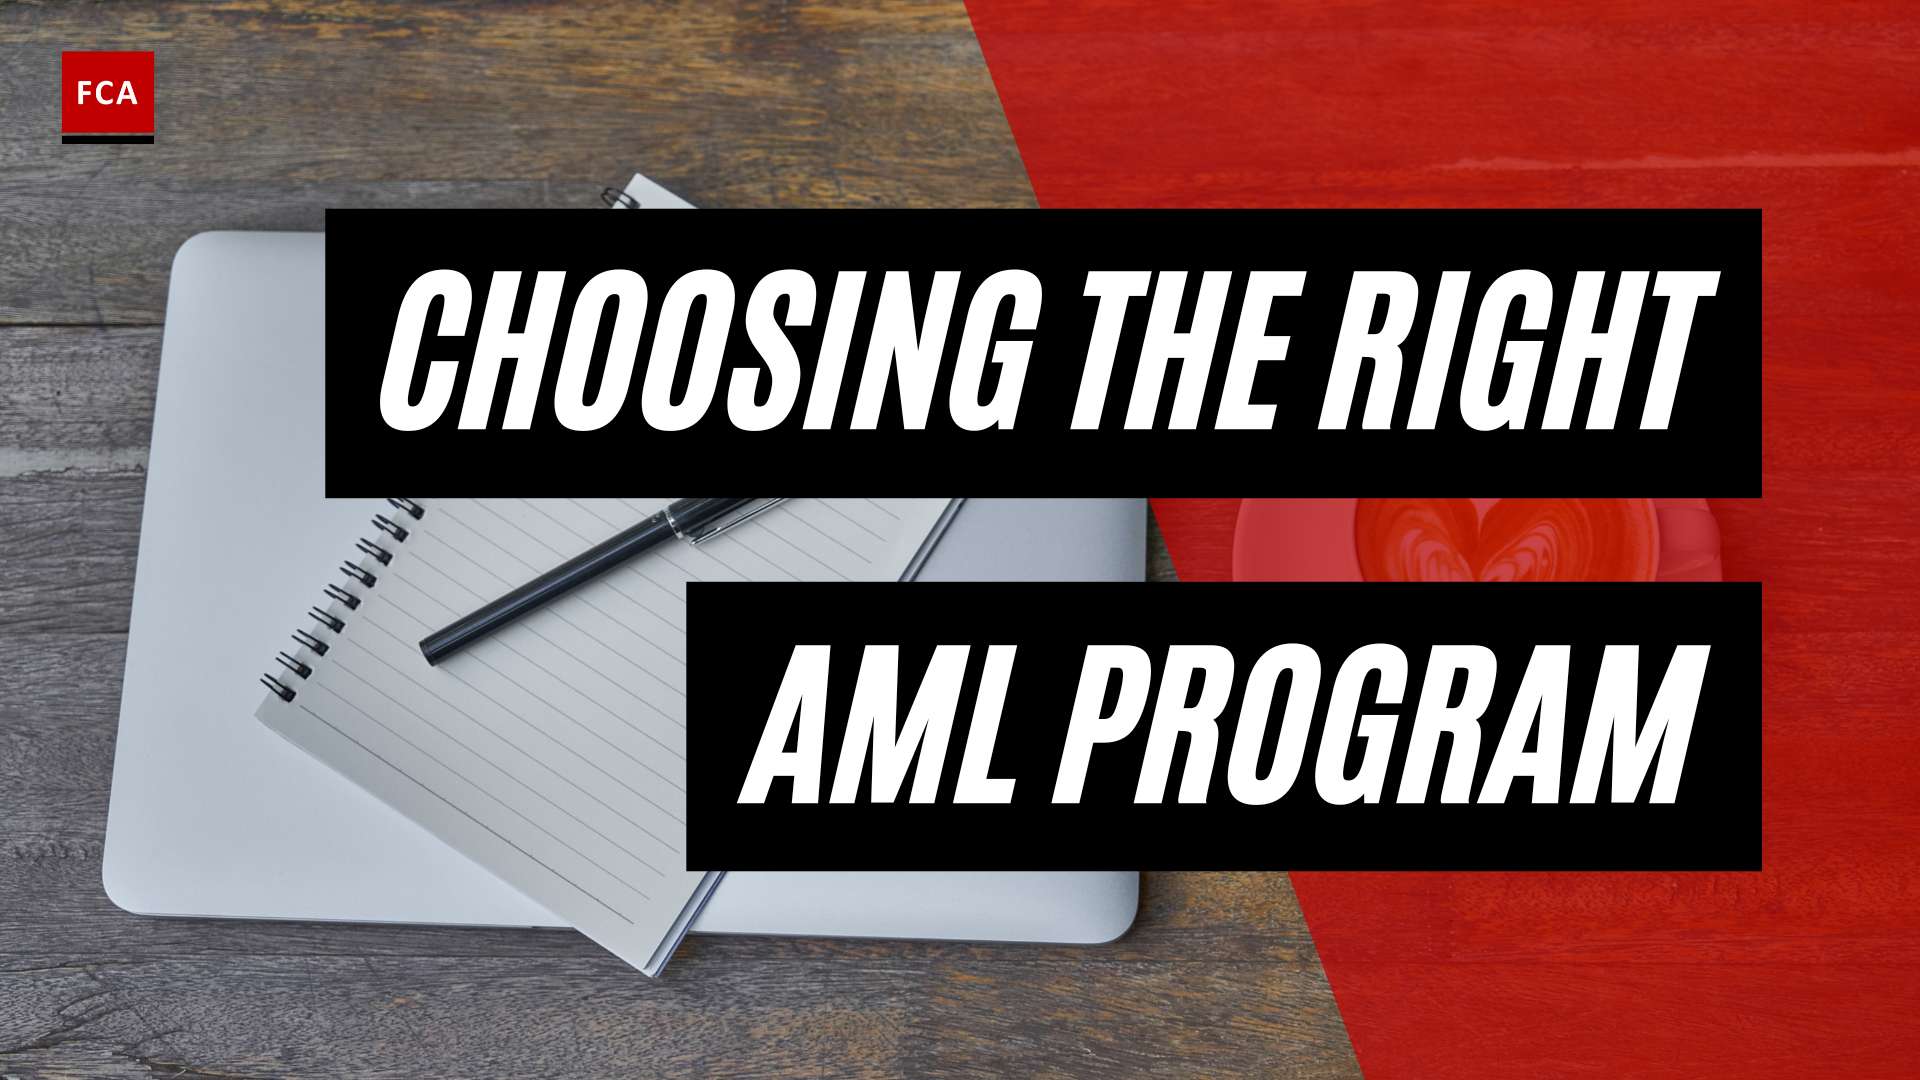 The Road To Aml Excellence: Choosing The Right Aml Training Program